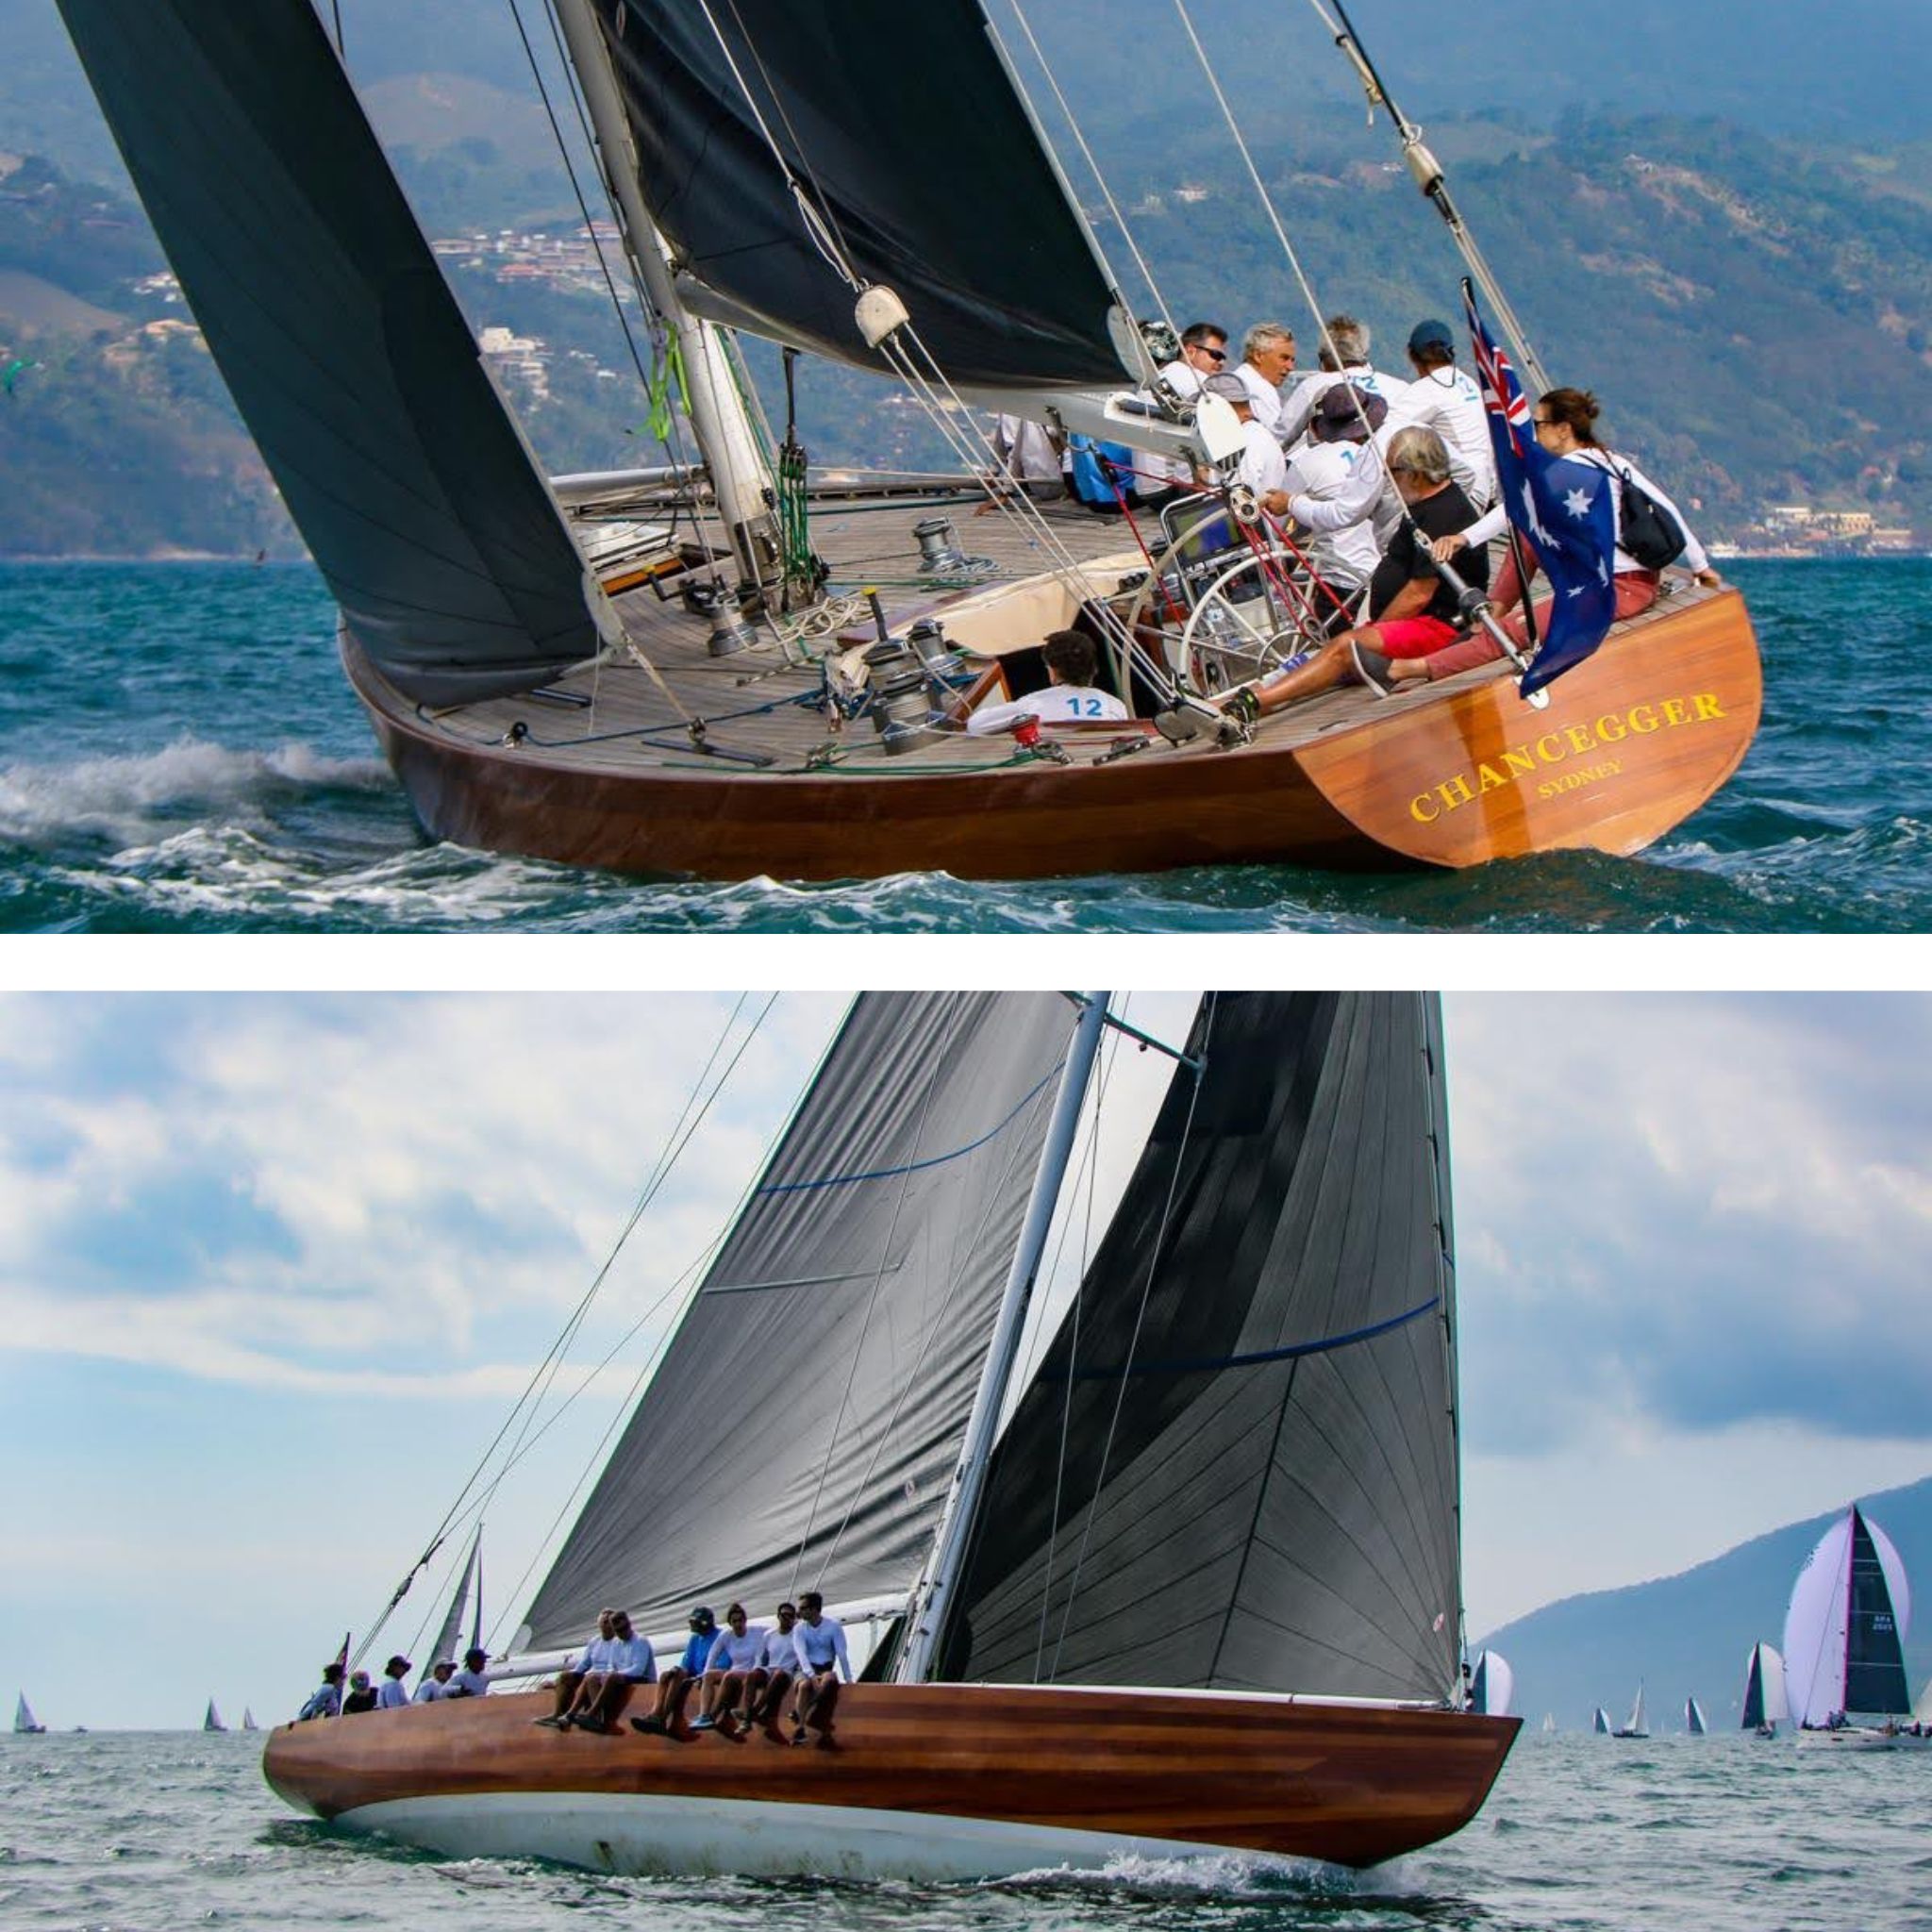 CHANCEGGER: New racing yacht available for sale!